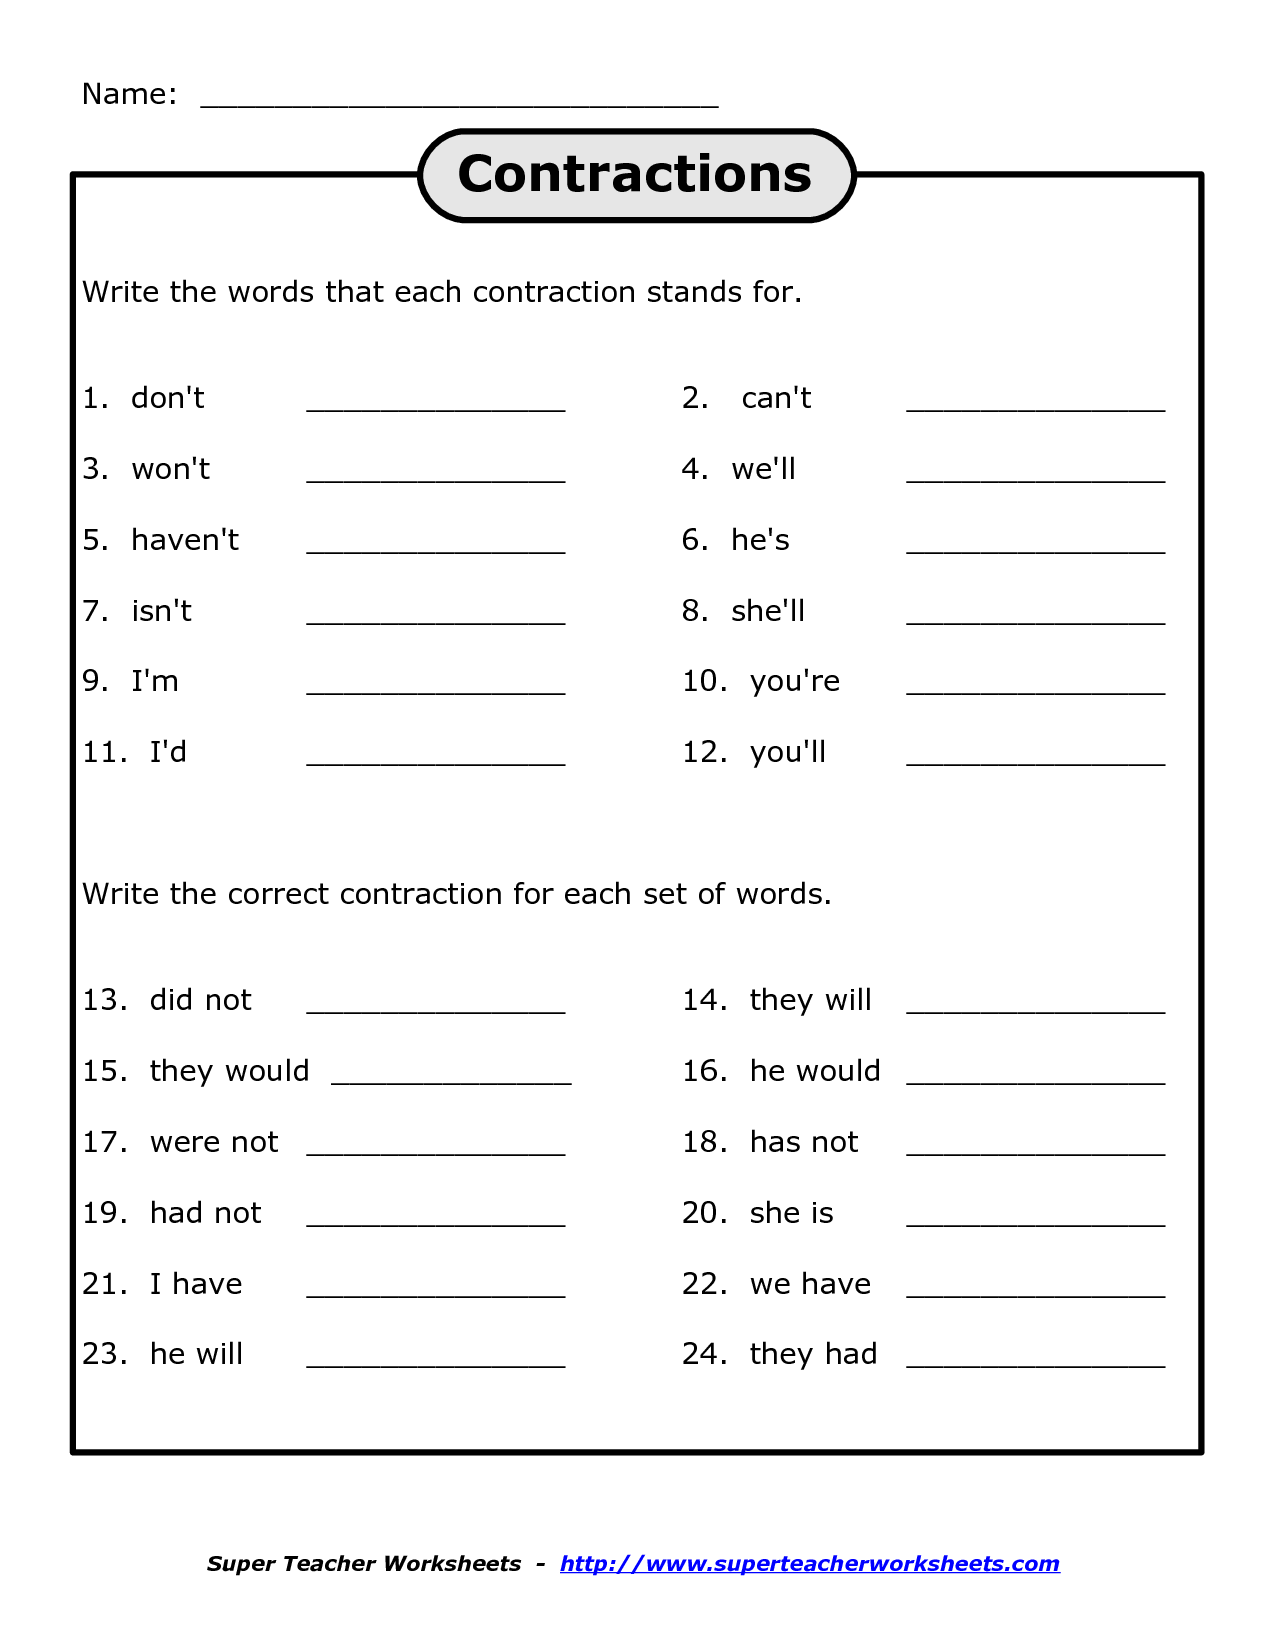 12 Best Images Of Contractions Using Not Worksheets Contractions Worksheet Contraction